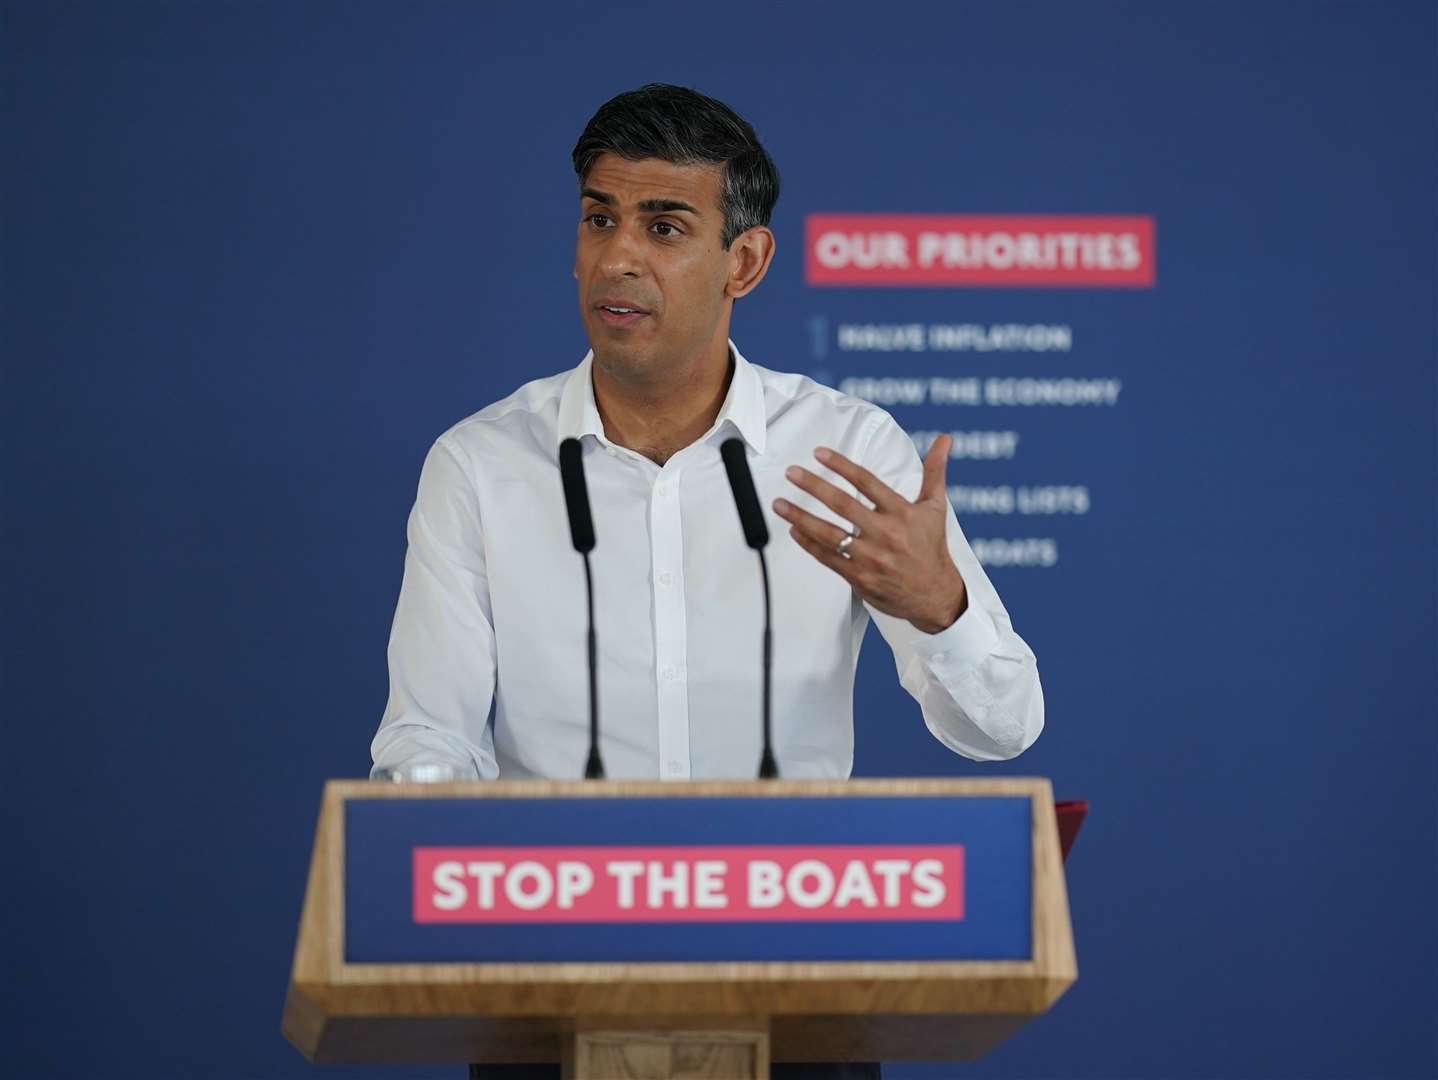 Prime Minister Rishi Sunak has made ‘stopping the boats’ a key aim of his premiership (PA)